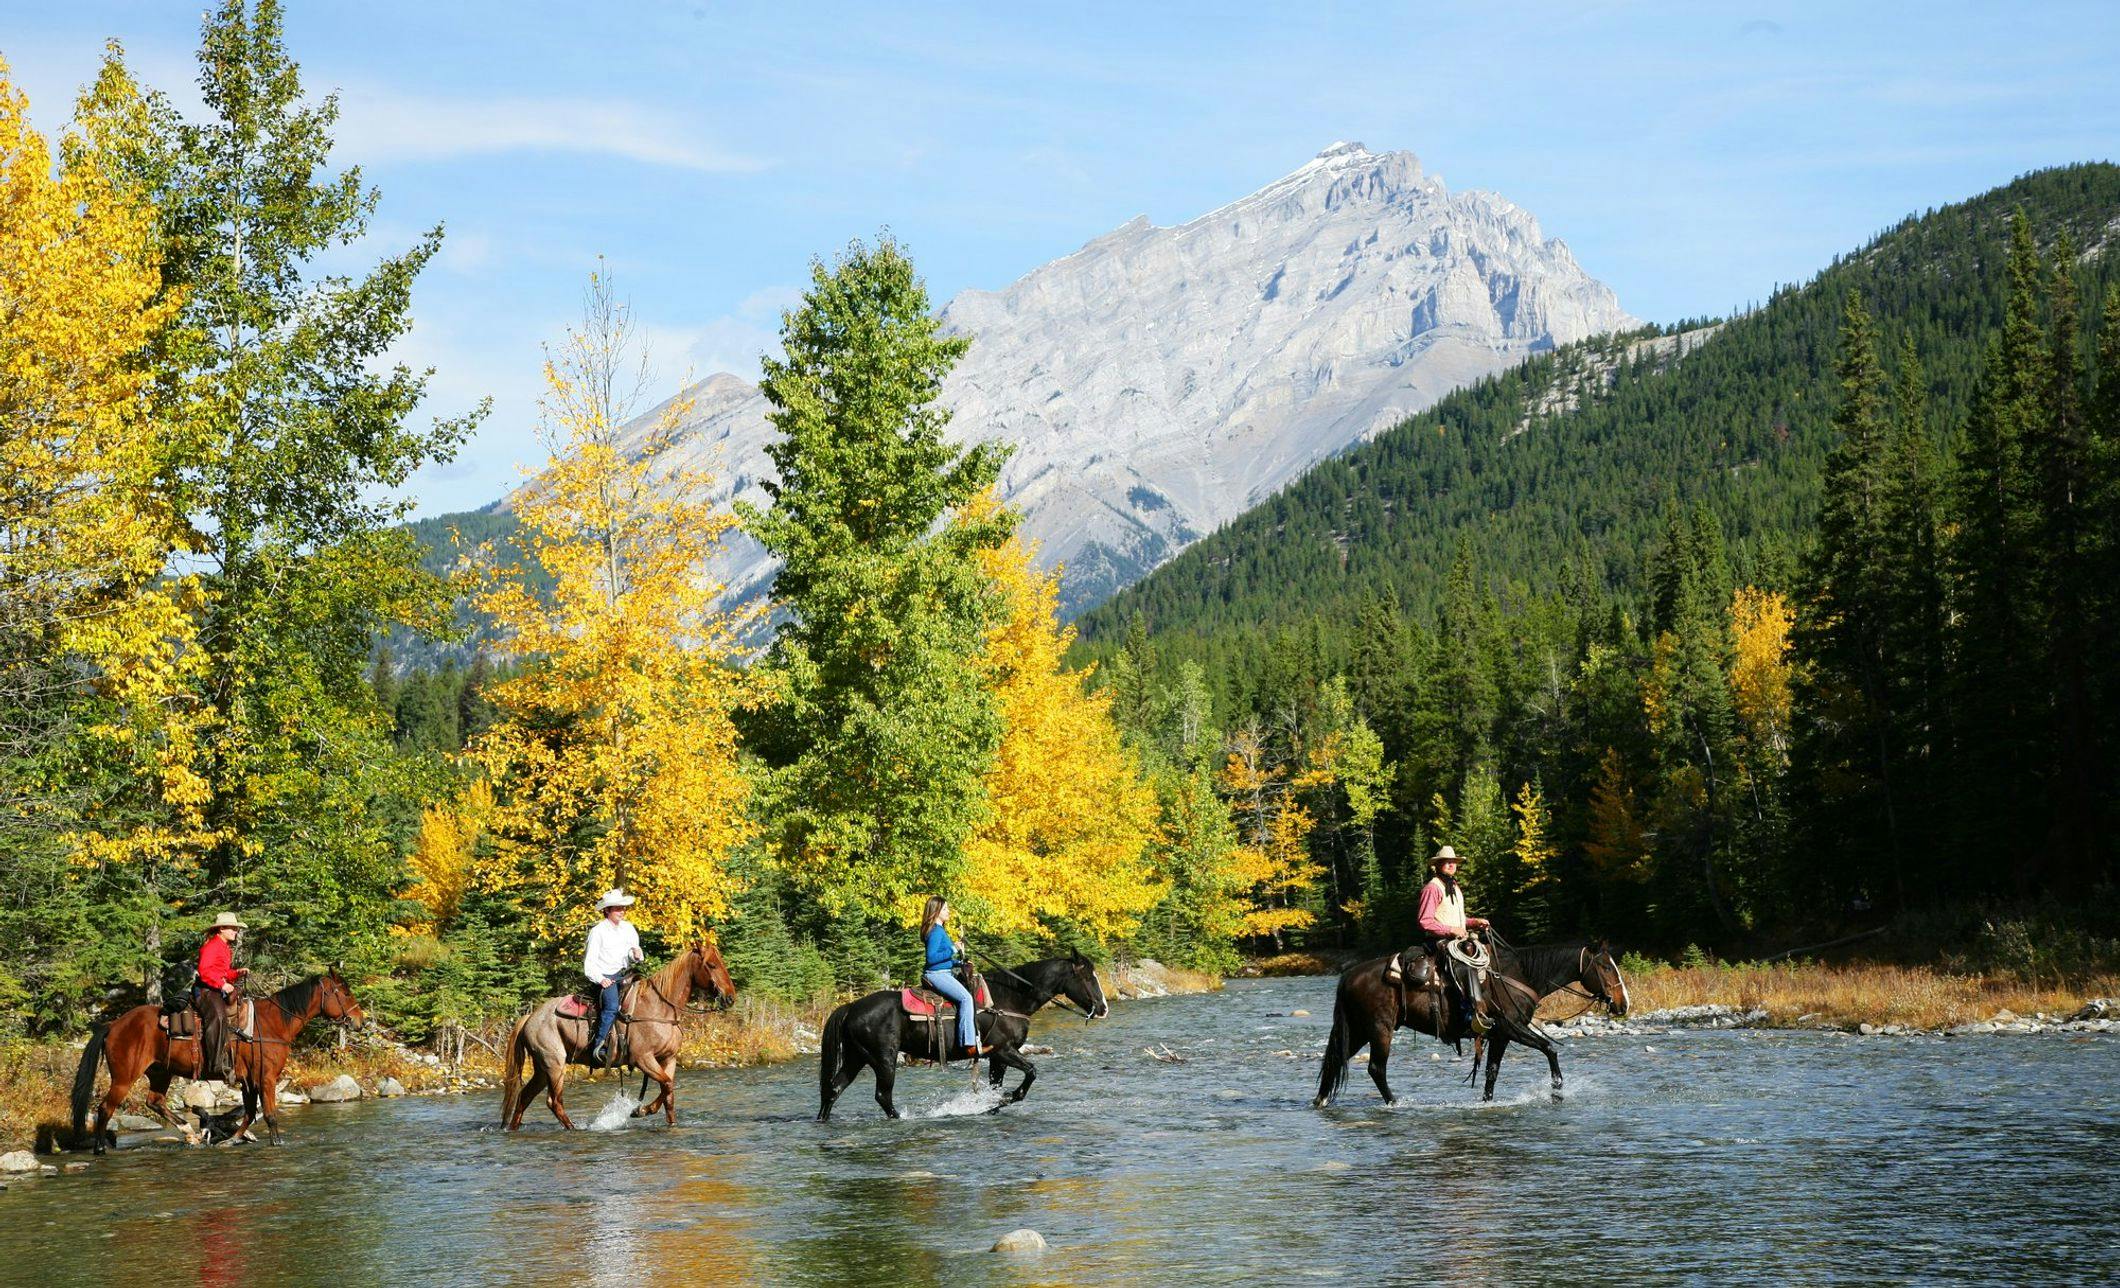 Four horses and riders cross a shallow river surrounded by colourful trees on a warm summer day